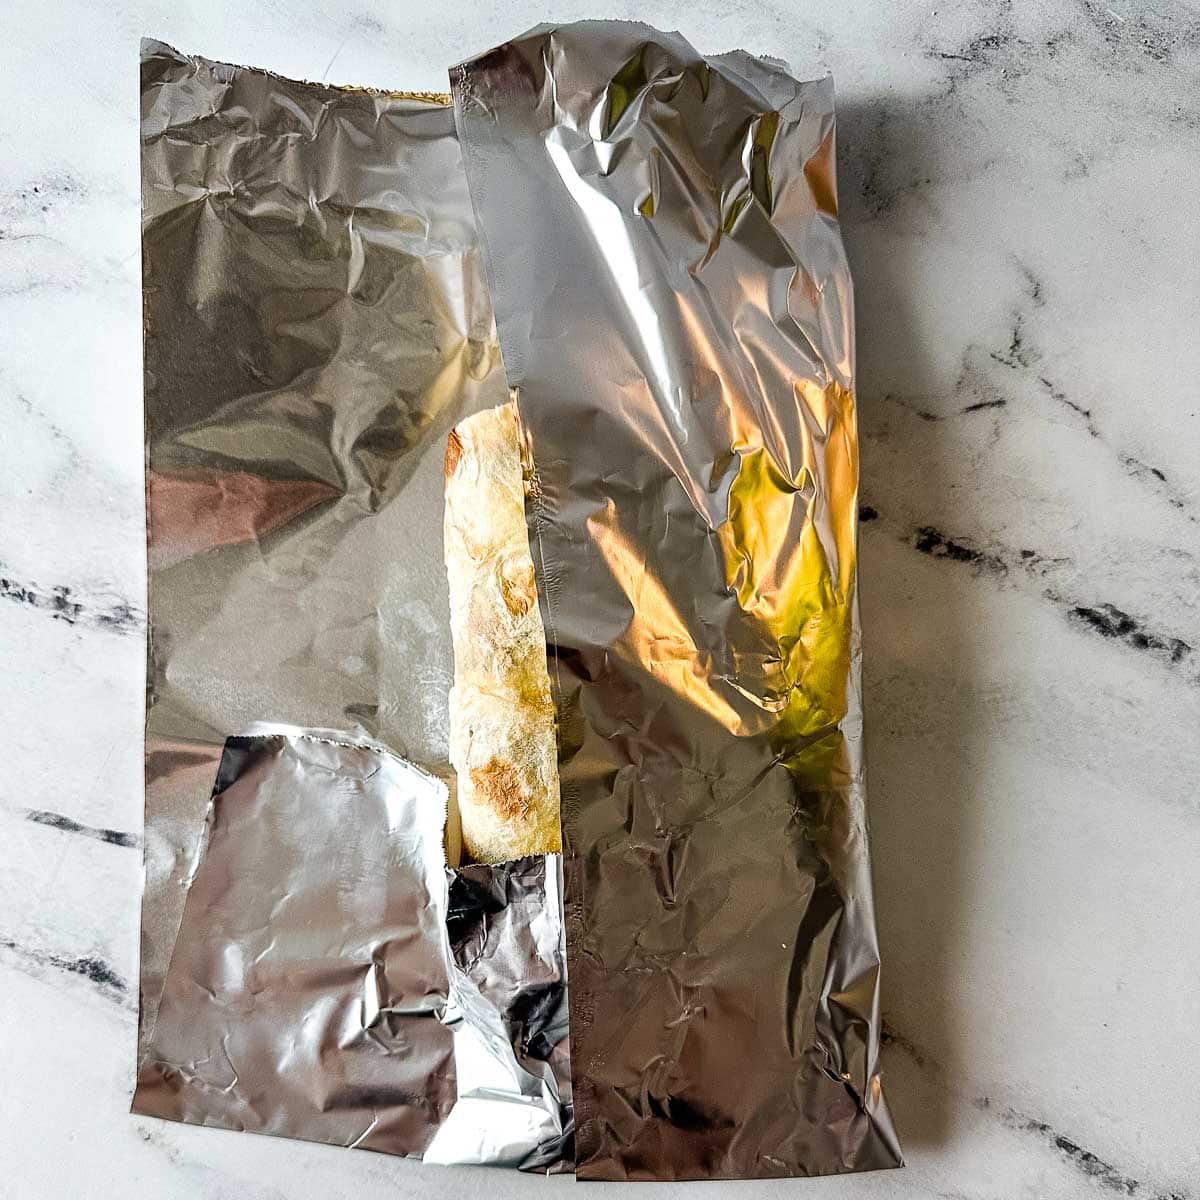 The bottom portion of the foil and the right vertical edge of foil are folded over the carne asada burrito.